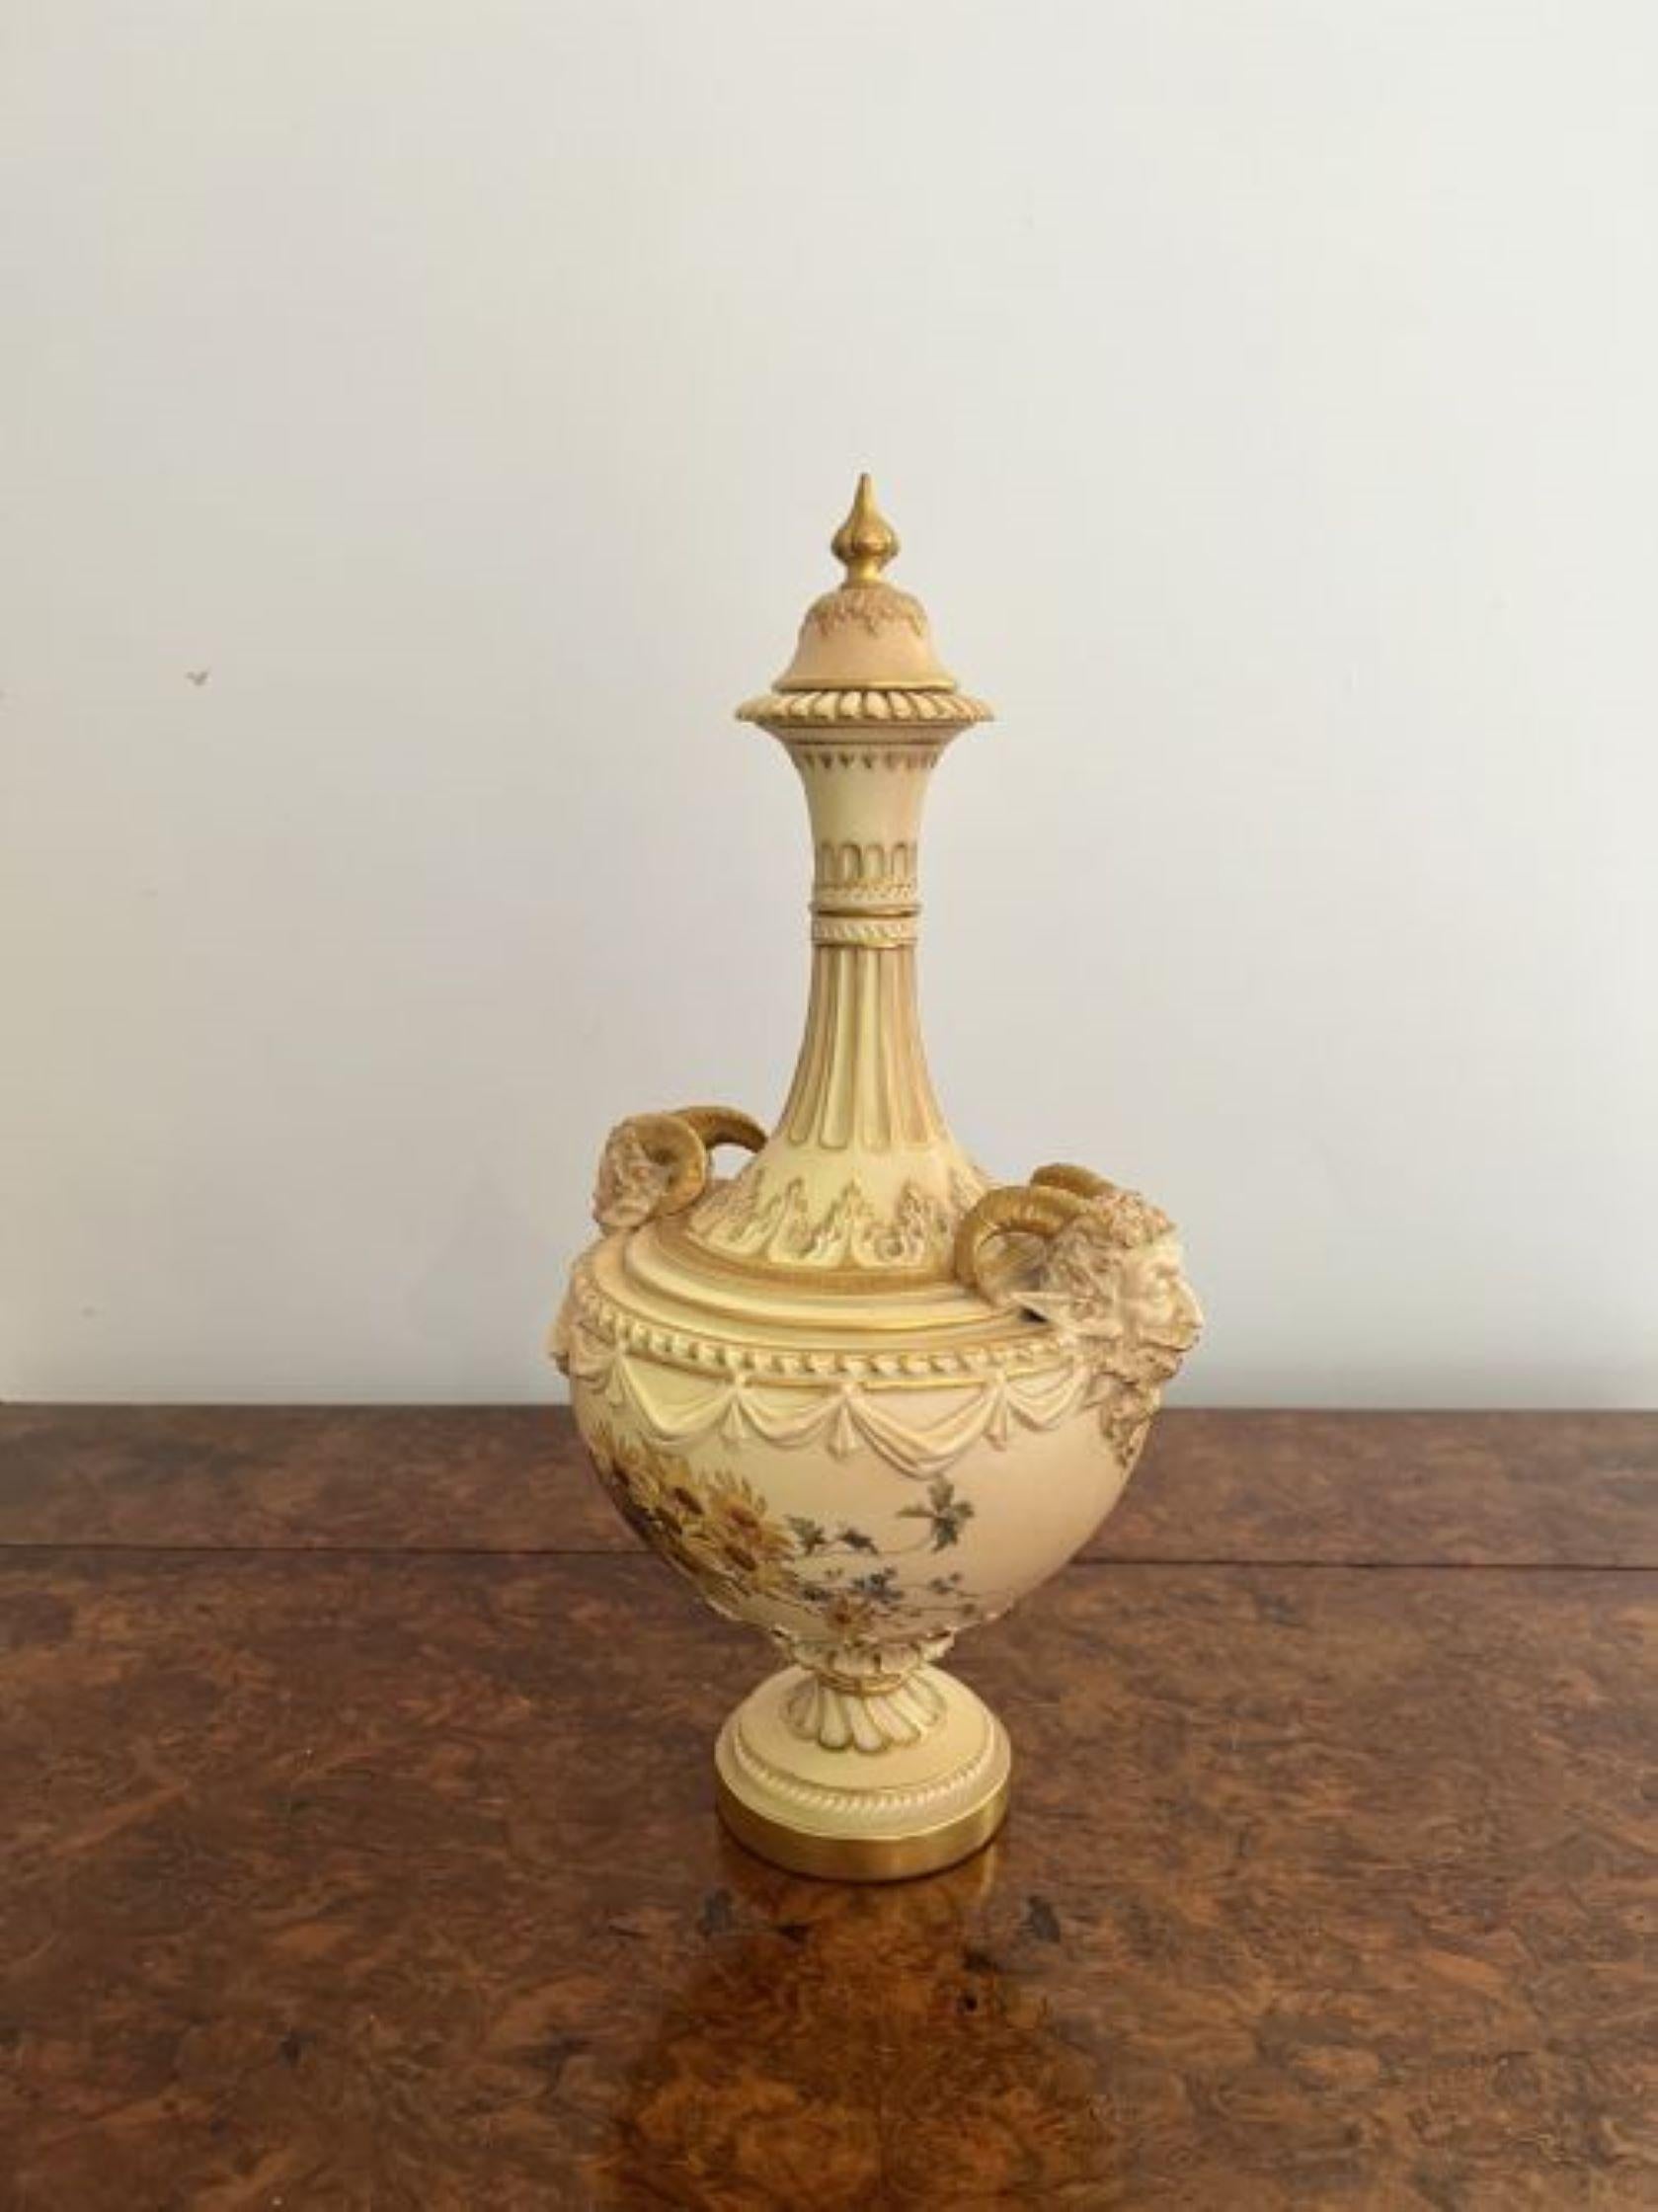 Fantastic quality antique Victorian Royal Worcester vase by Edward Raby, having a fantastic quality Royal Worcester blush ivory vase, decorated with wild flowers and foliage in fantastic yellow, green, red and blue colours with gilt detail